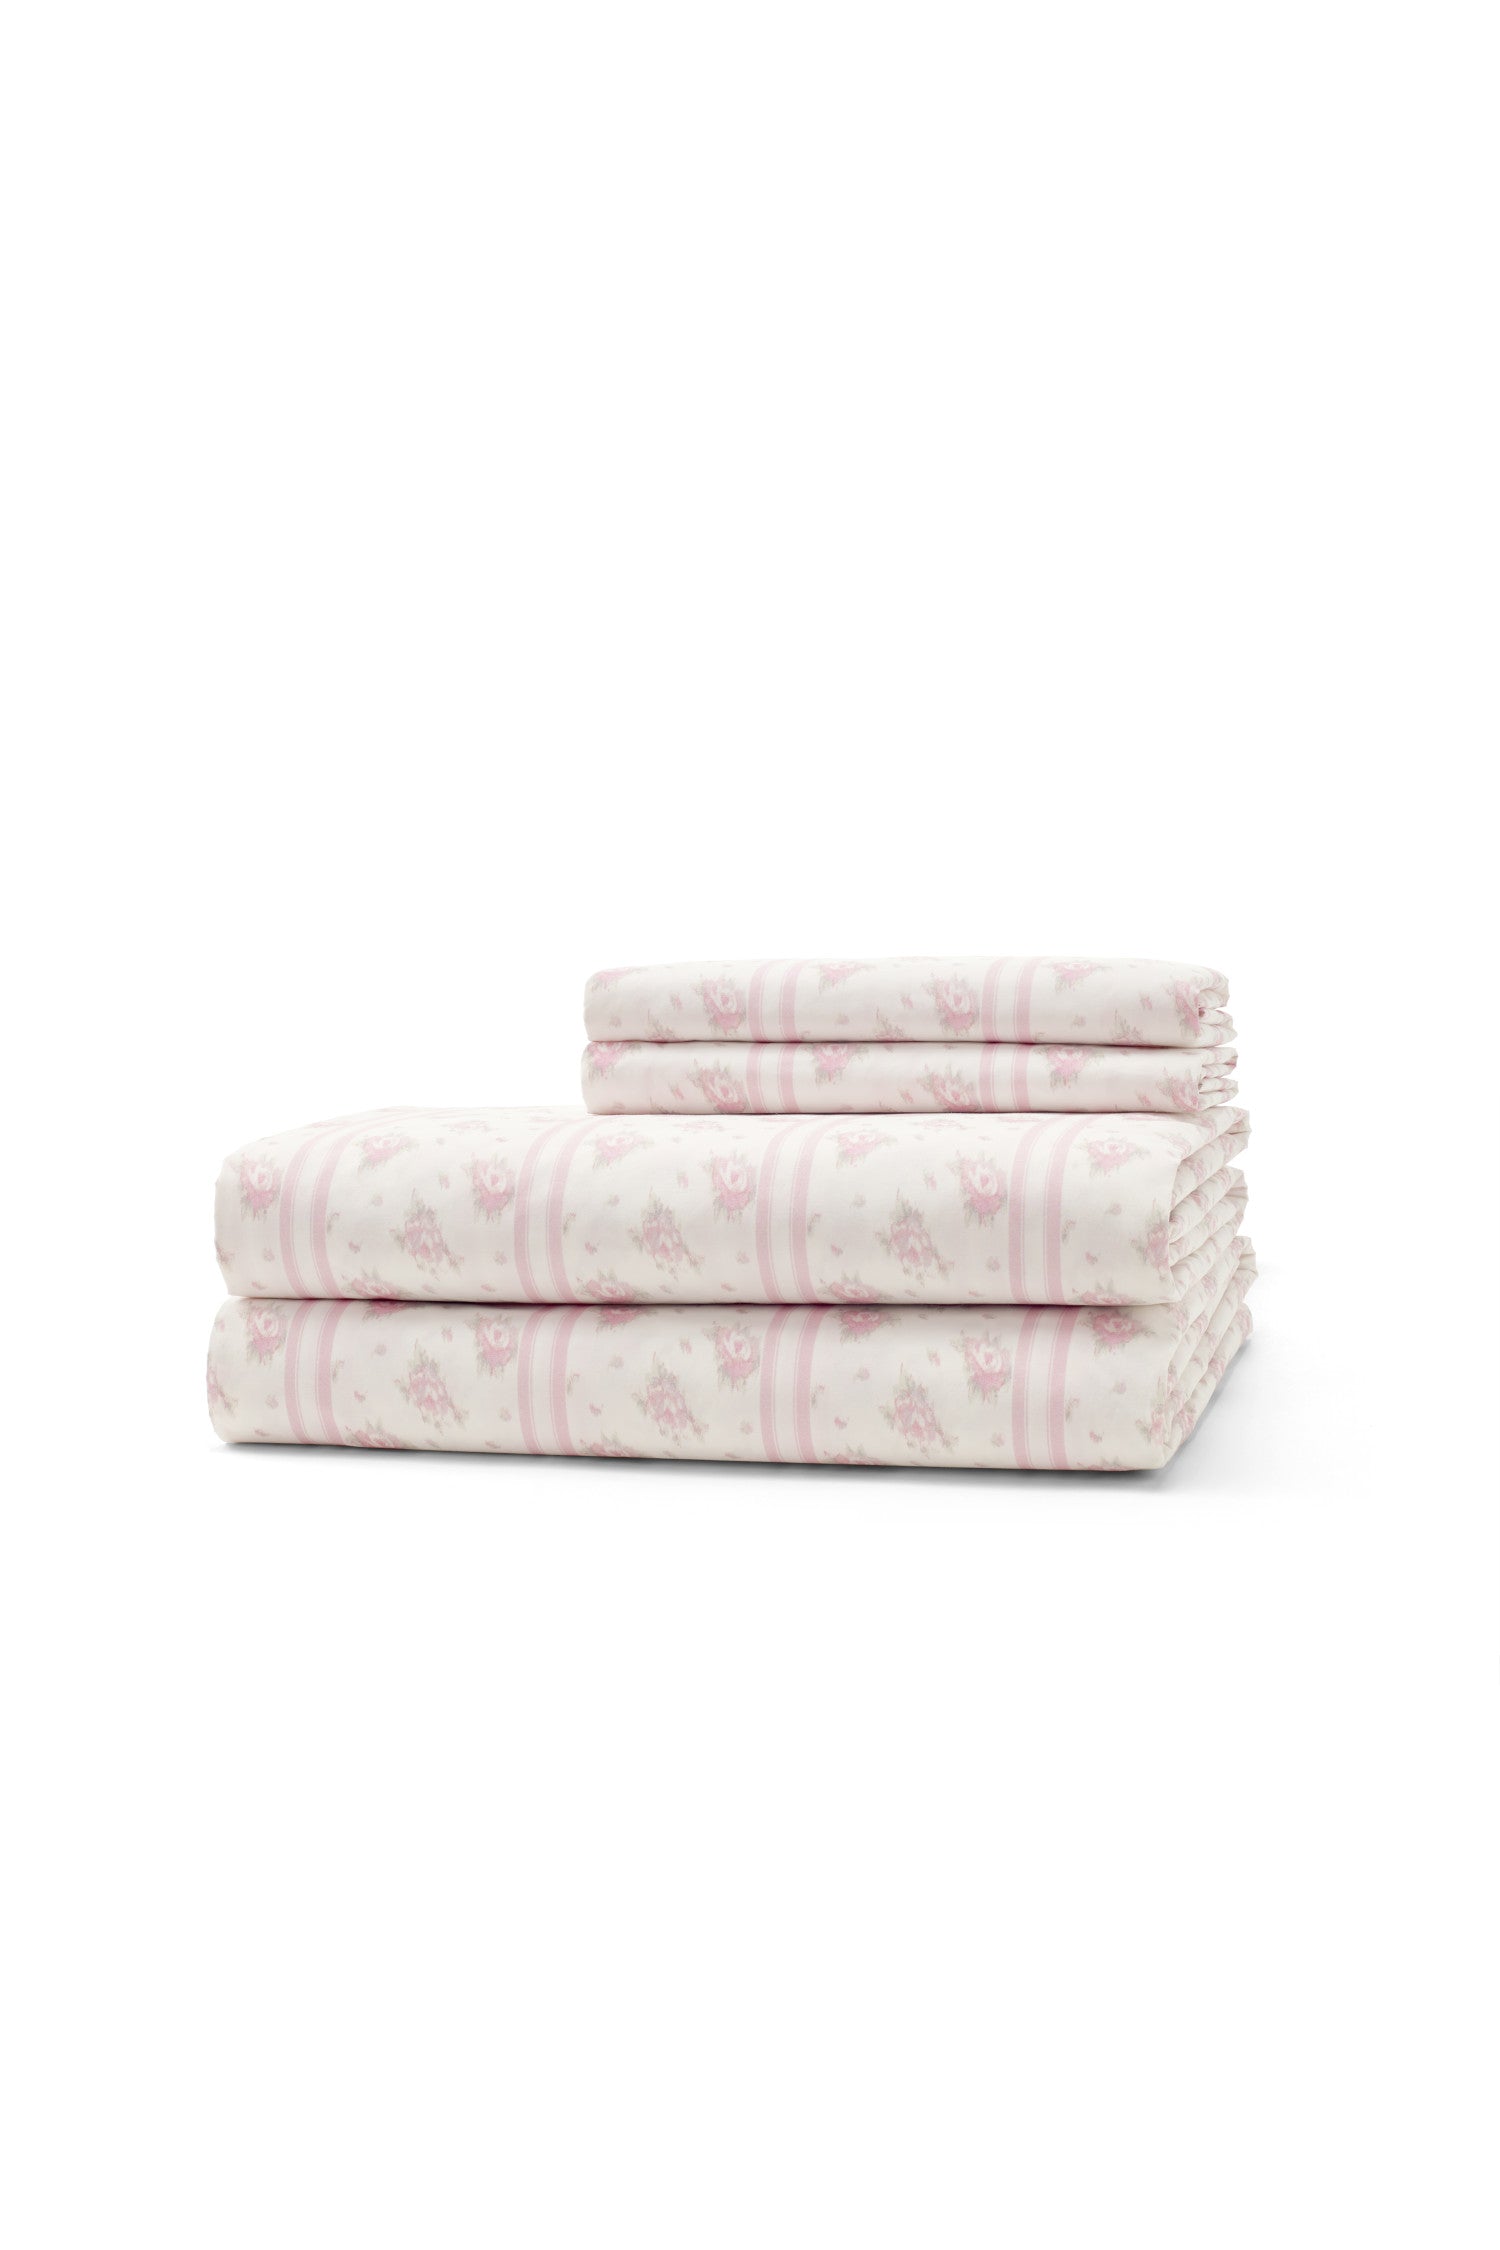  Introducing our lightweight and airy sheets in a beautiful floral pink design. Crafted from 100% cotton, these sheets offer the perfect combination of comfort and breathability.